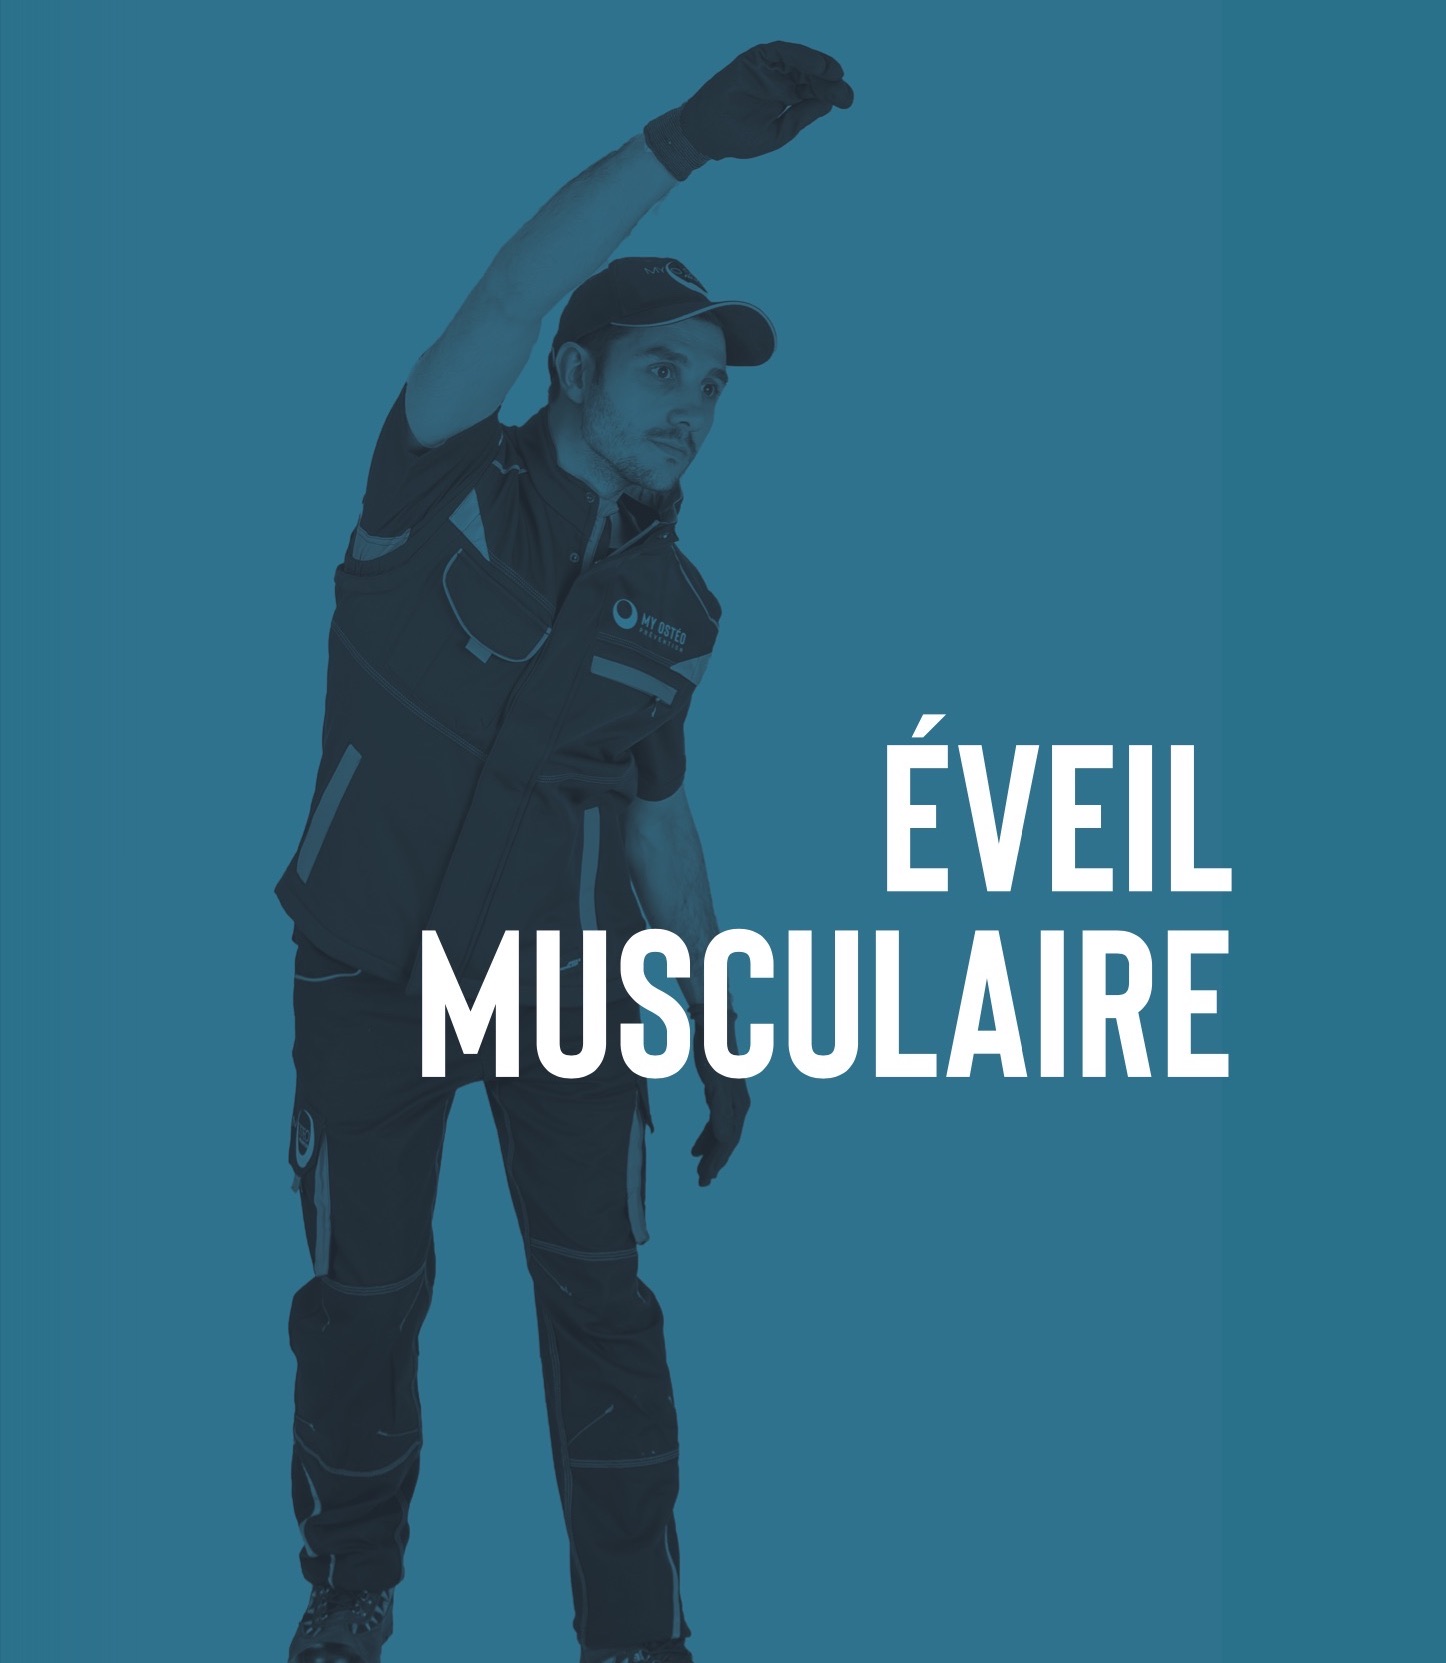 Eveil Musculaire